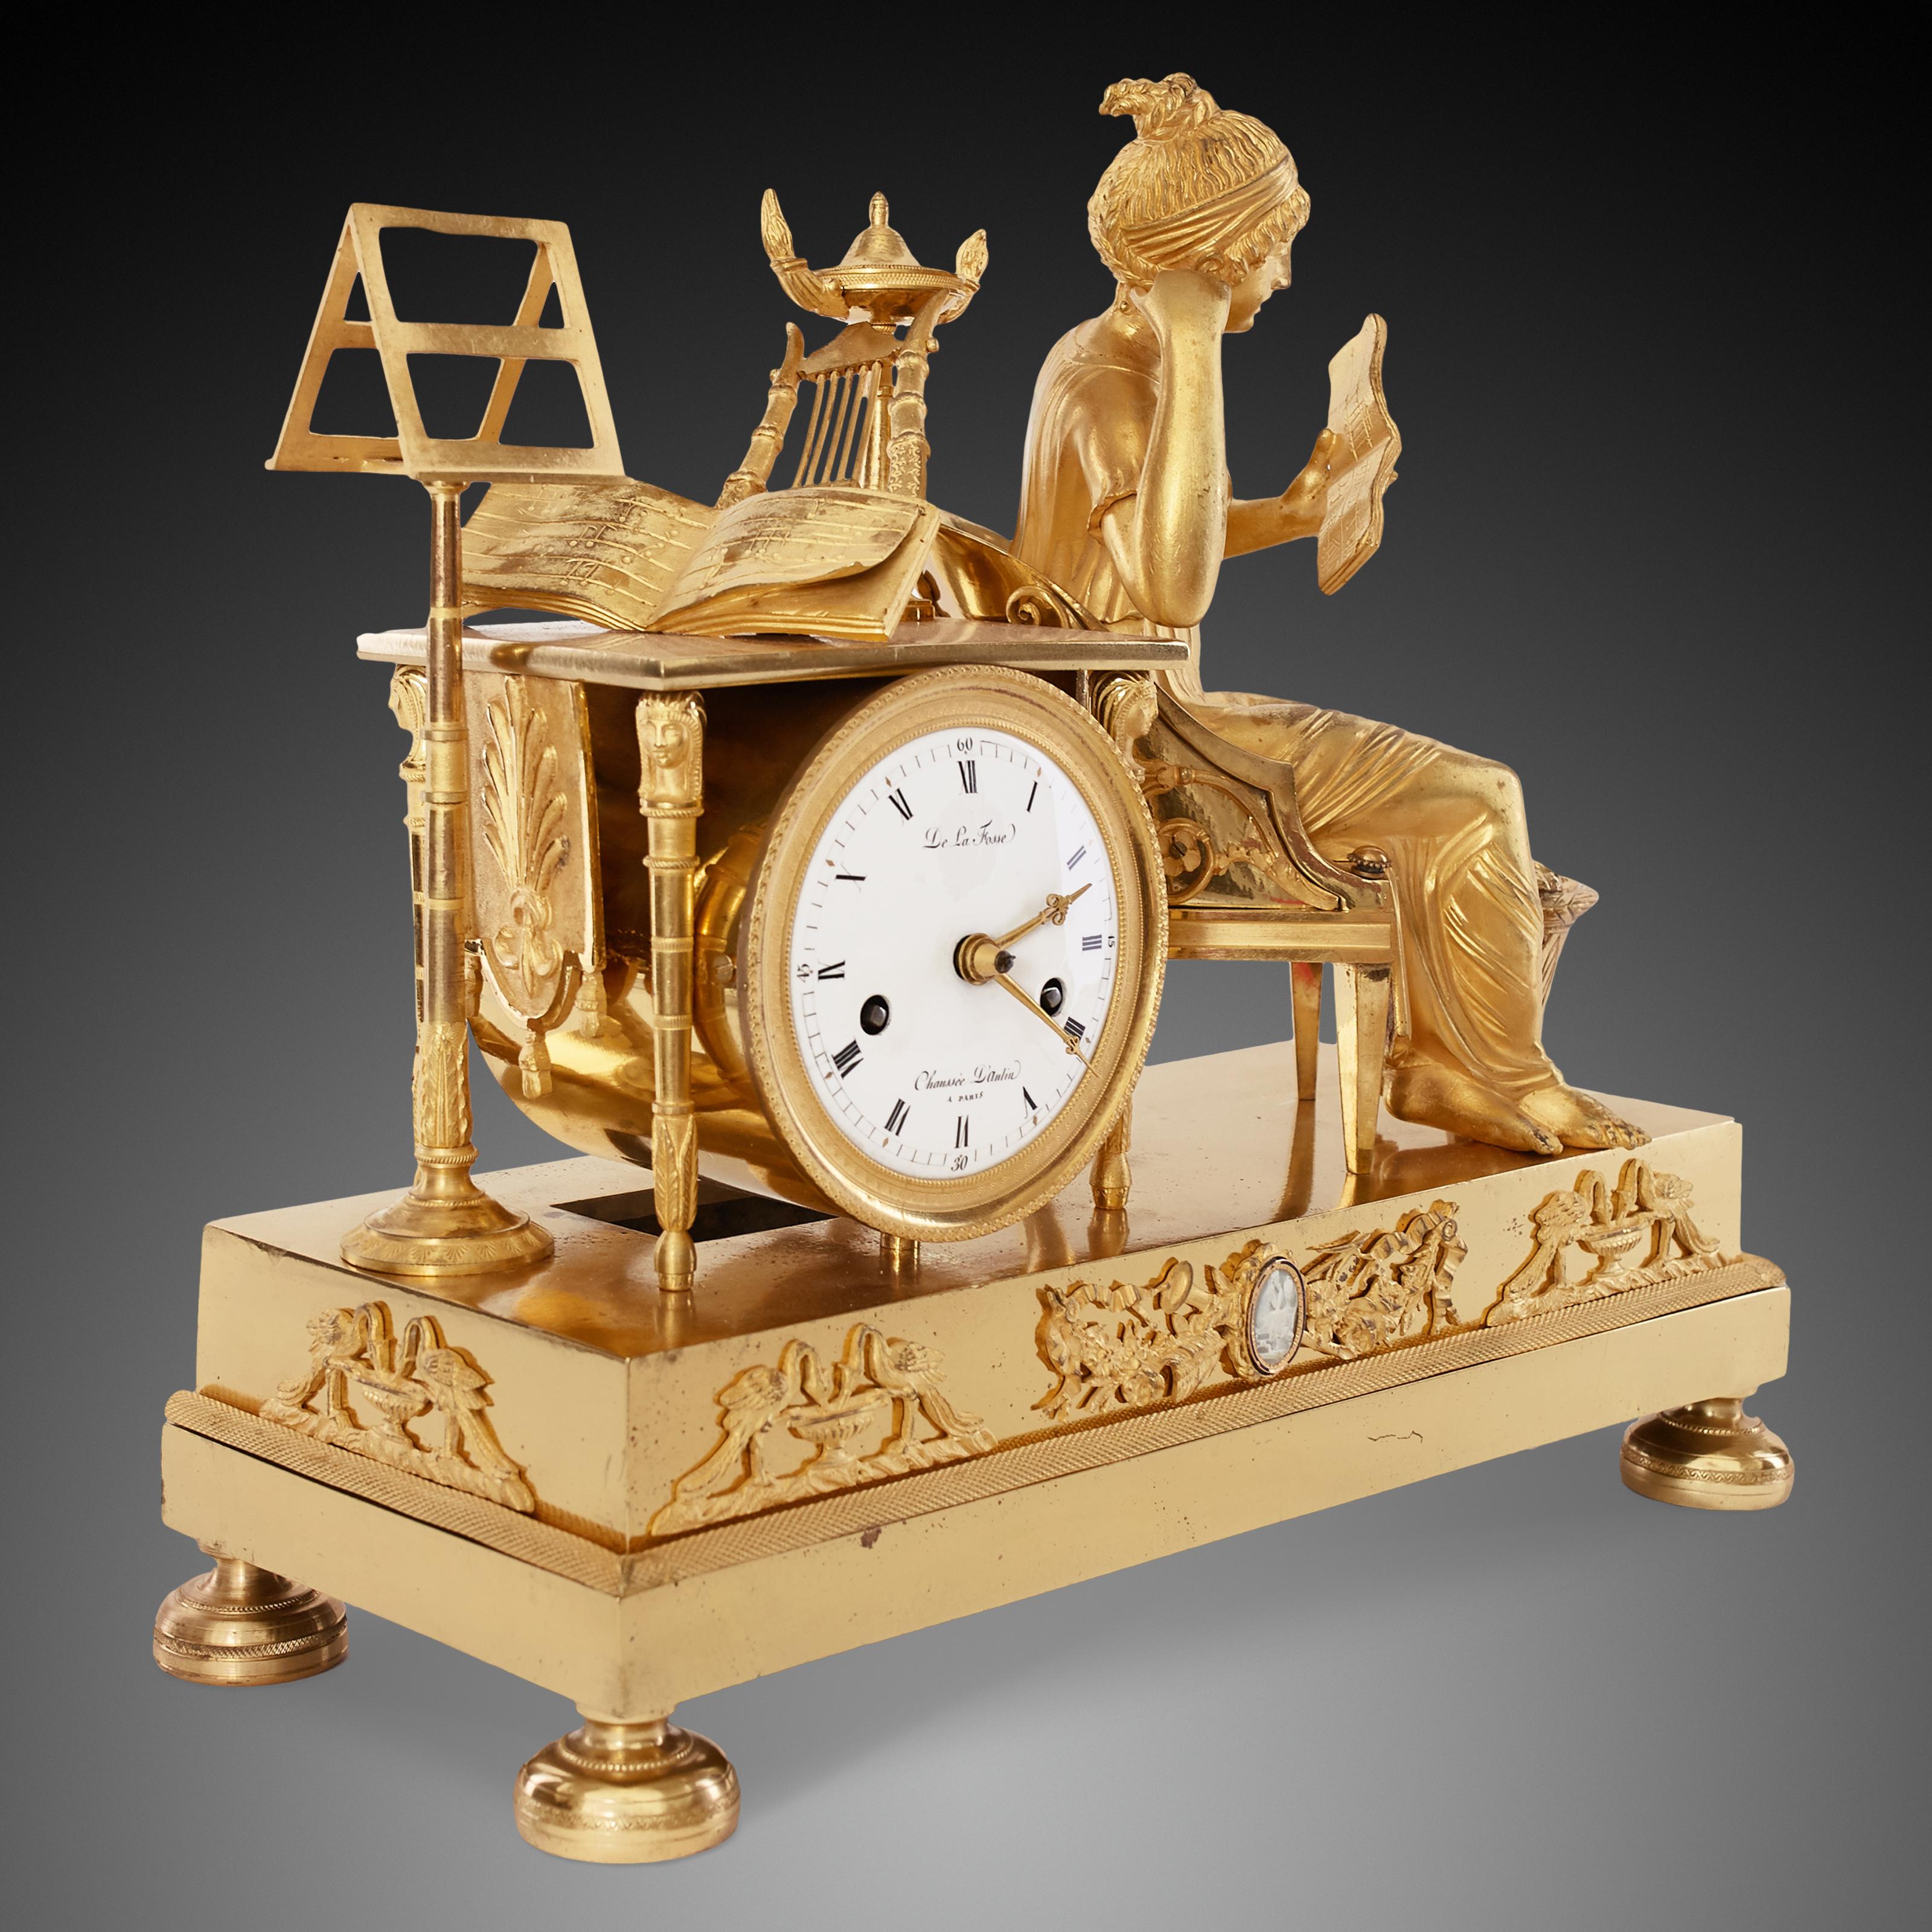 French Mantel Clock 19th Century Styl Empire by Chaussee D'aulin À Paris For Sale